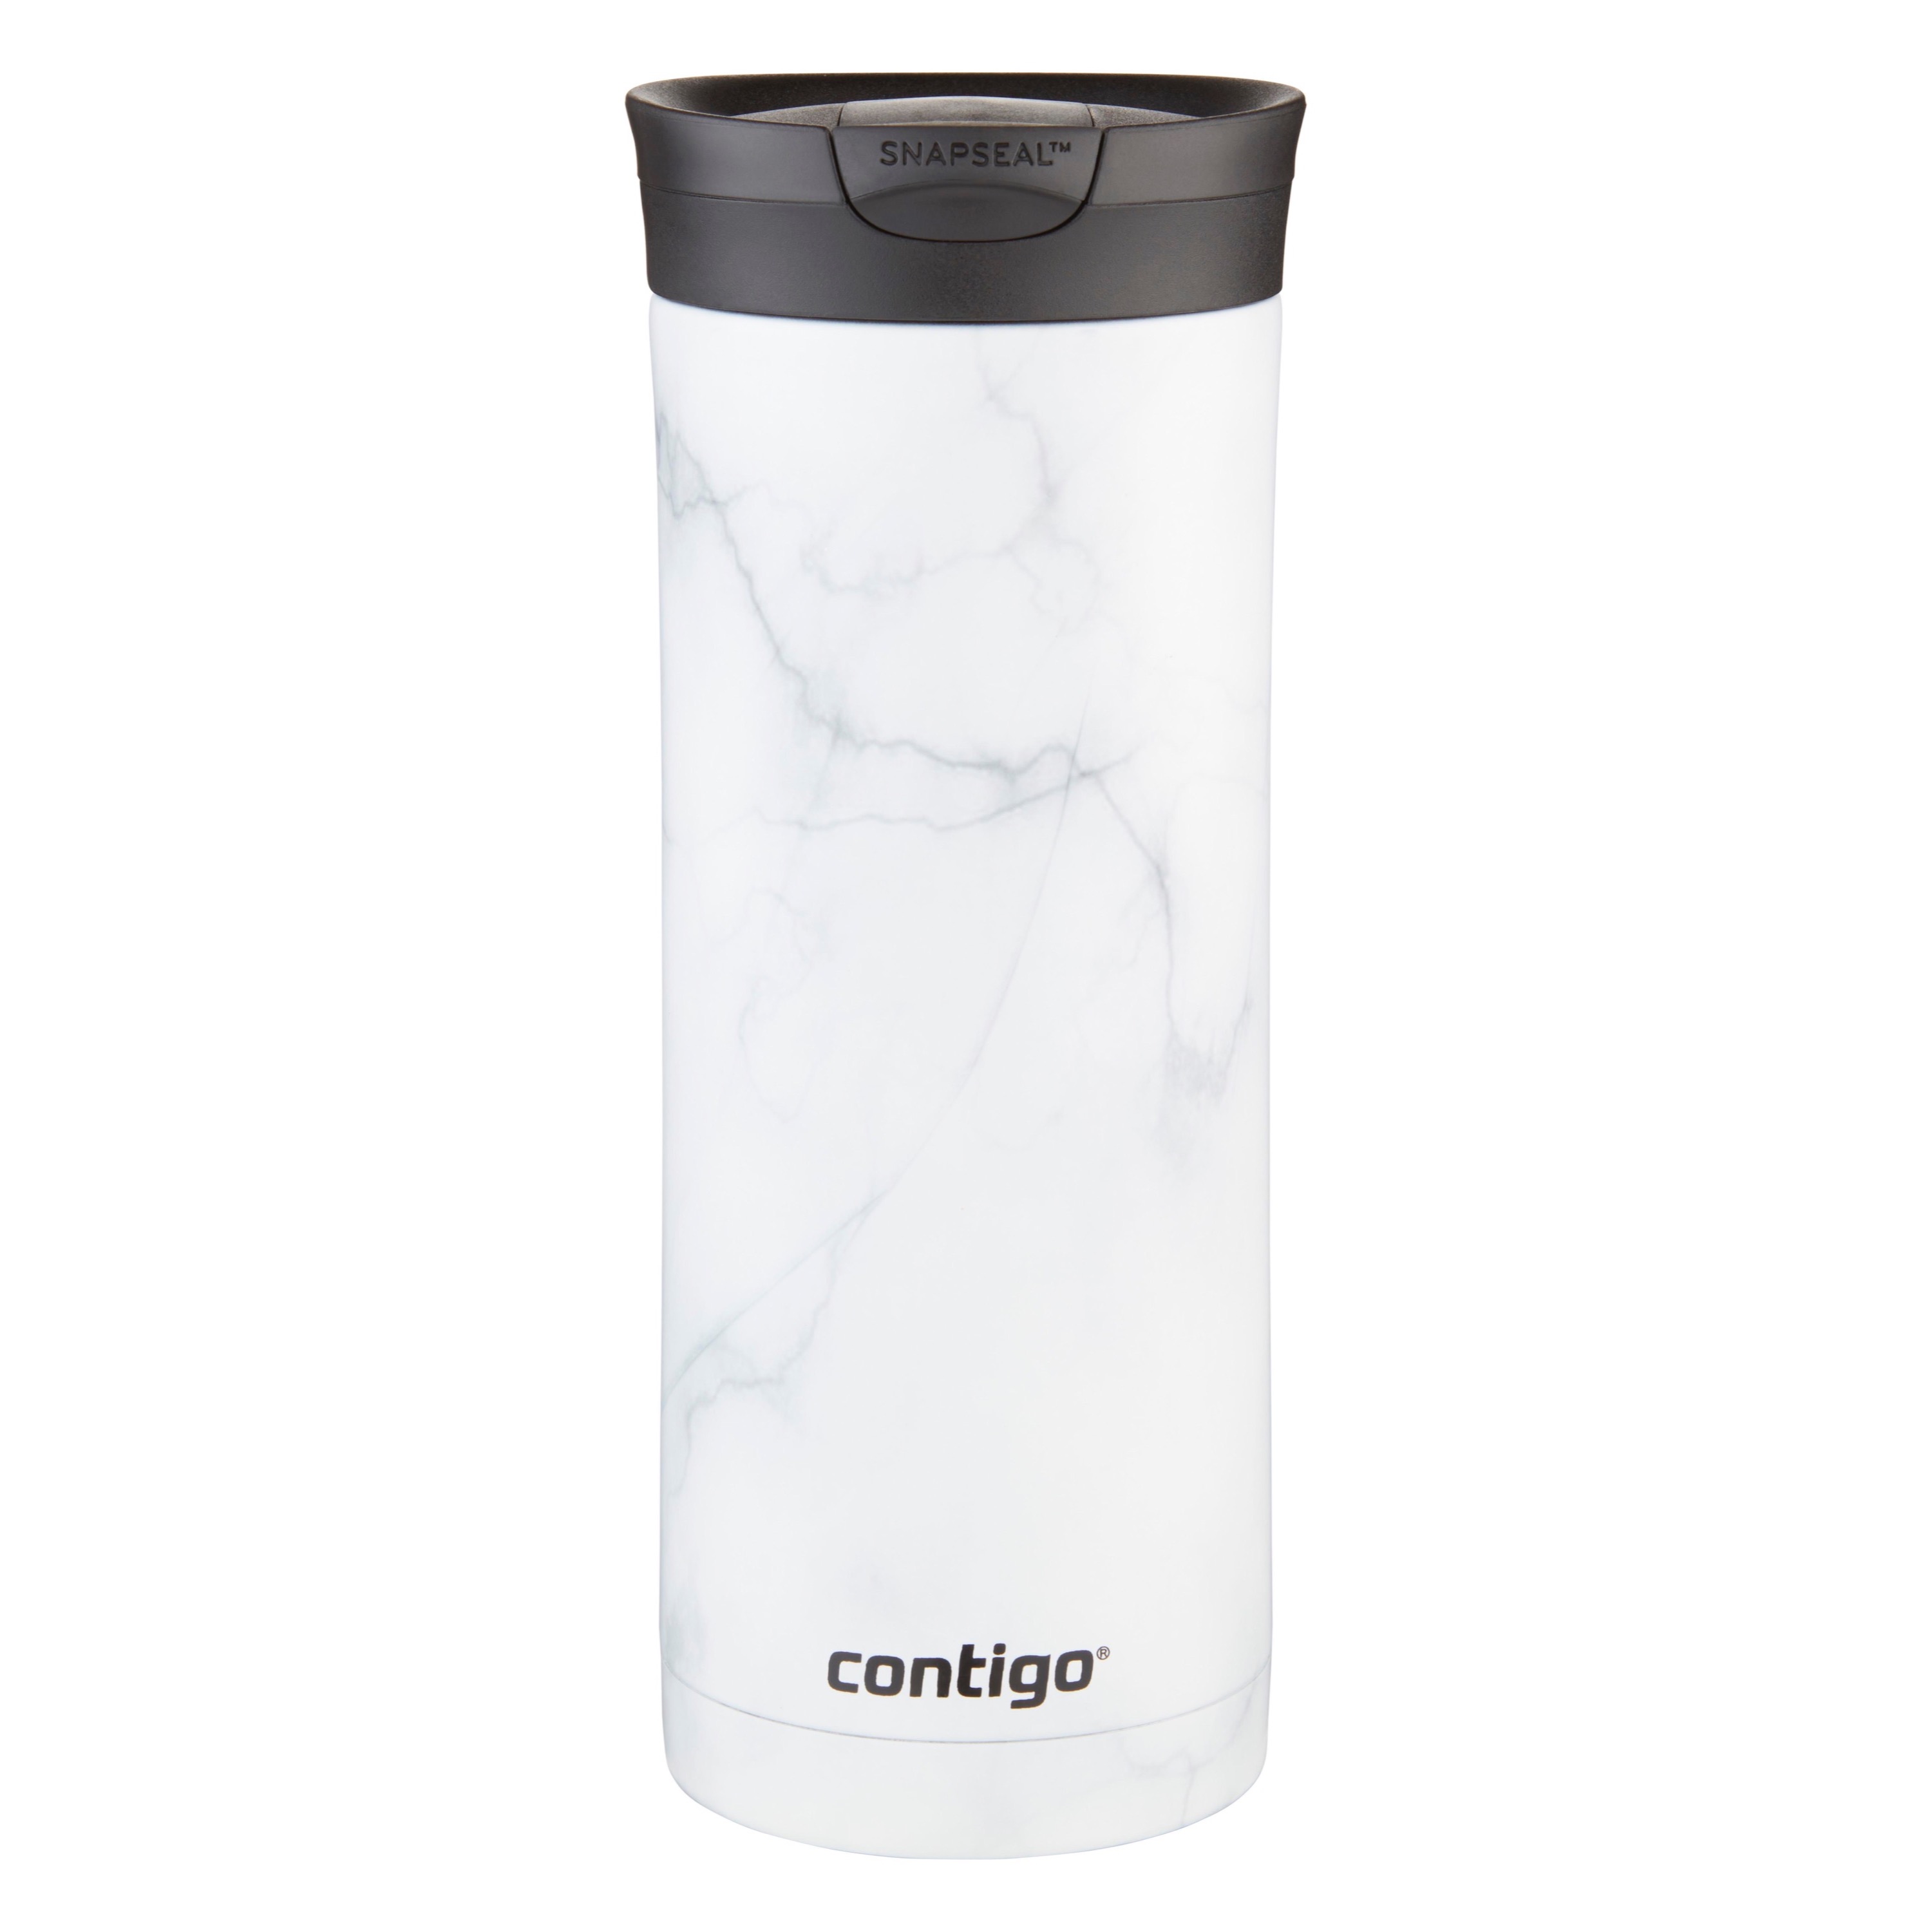 Contigo Couture Huron Stainless Steel Travel Mug with SNAPSEAL Lid White Marble, 20 fl oz. - image 1 of 5